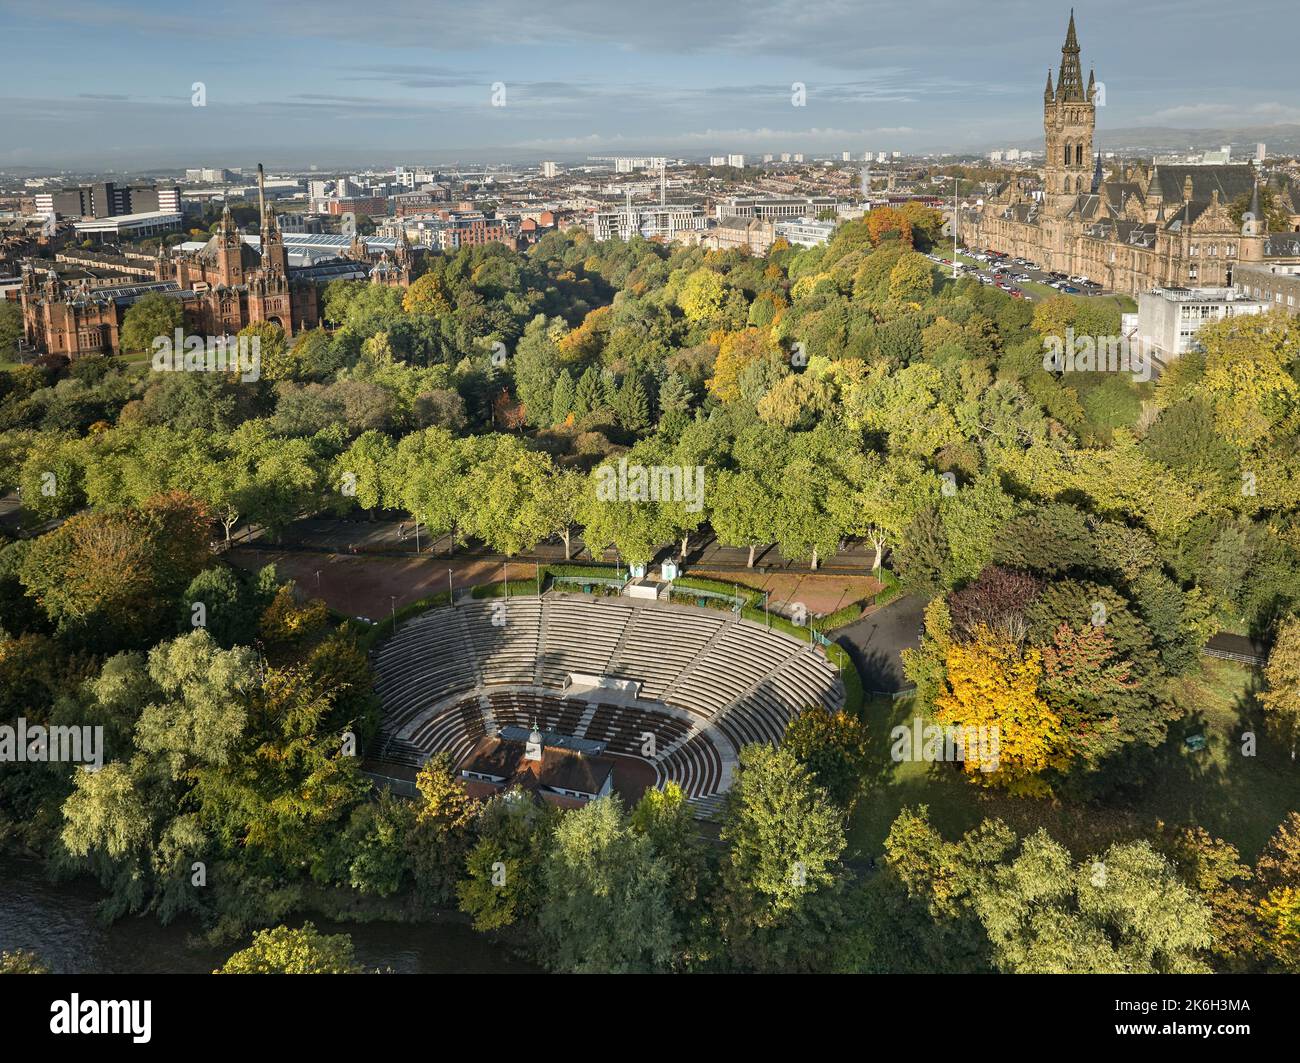 Aerial view of University of Glasgow with the Bandstand in Kelvingrove Park in the foreground. Stock Photo